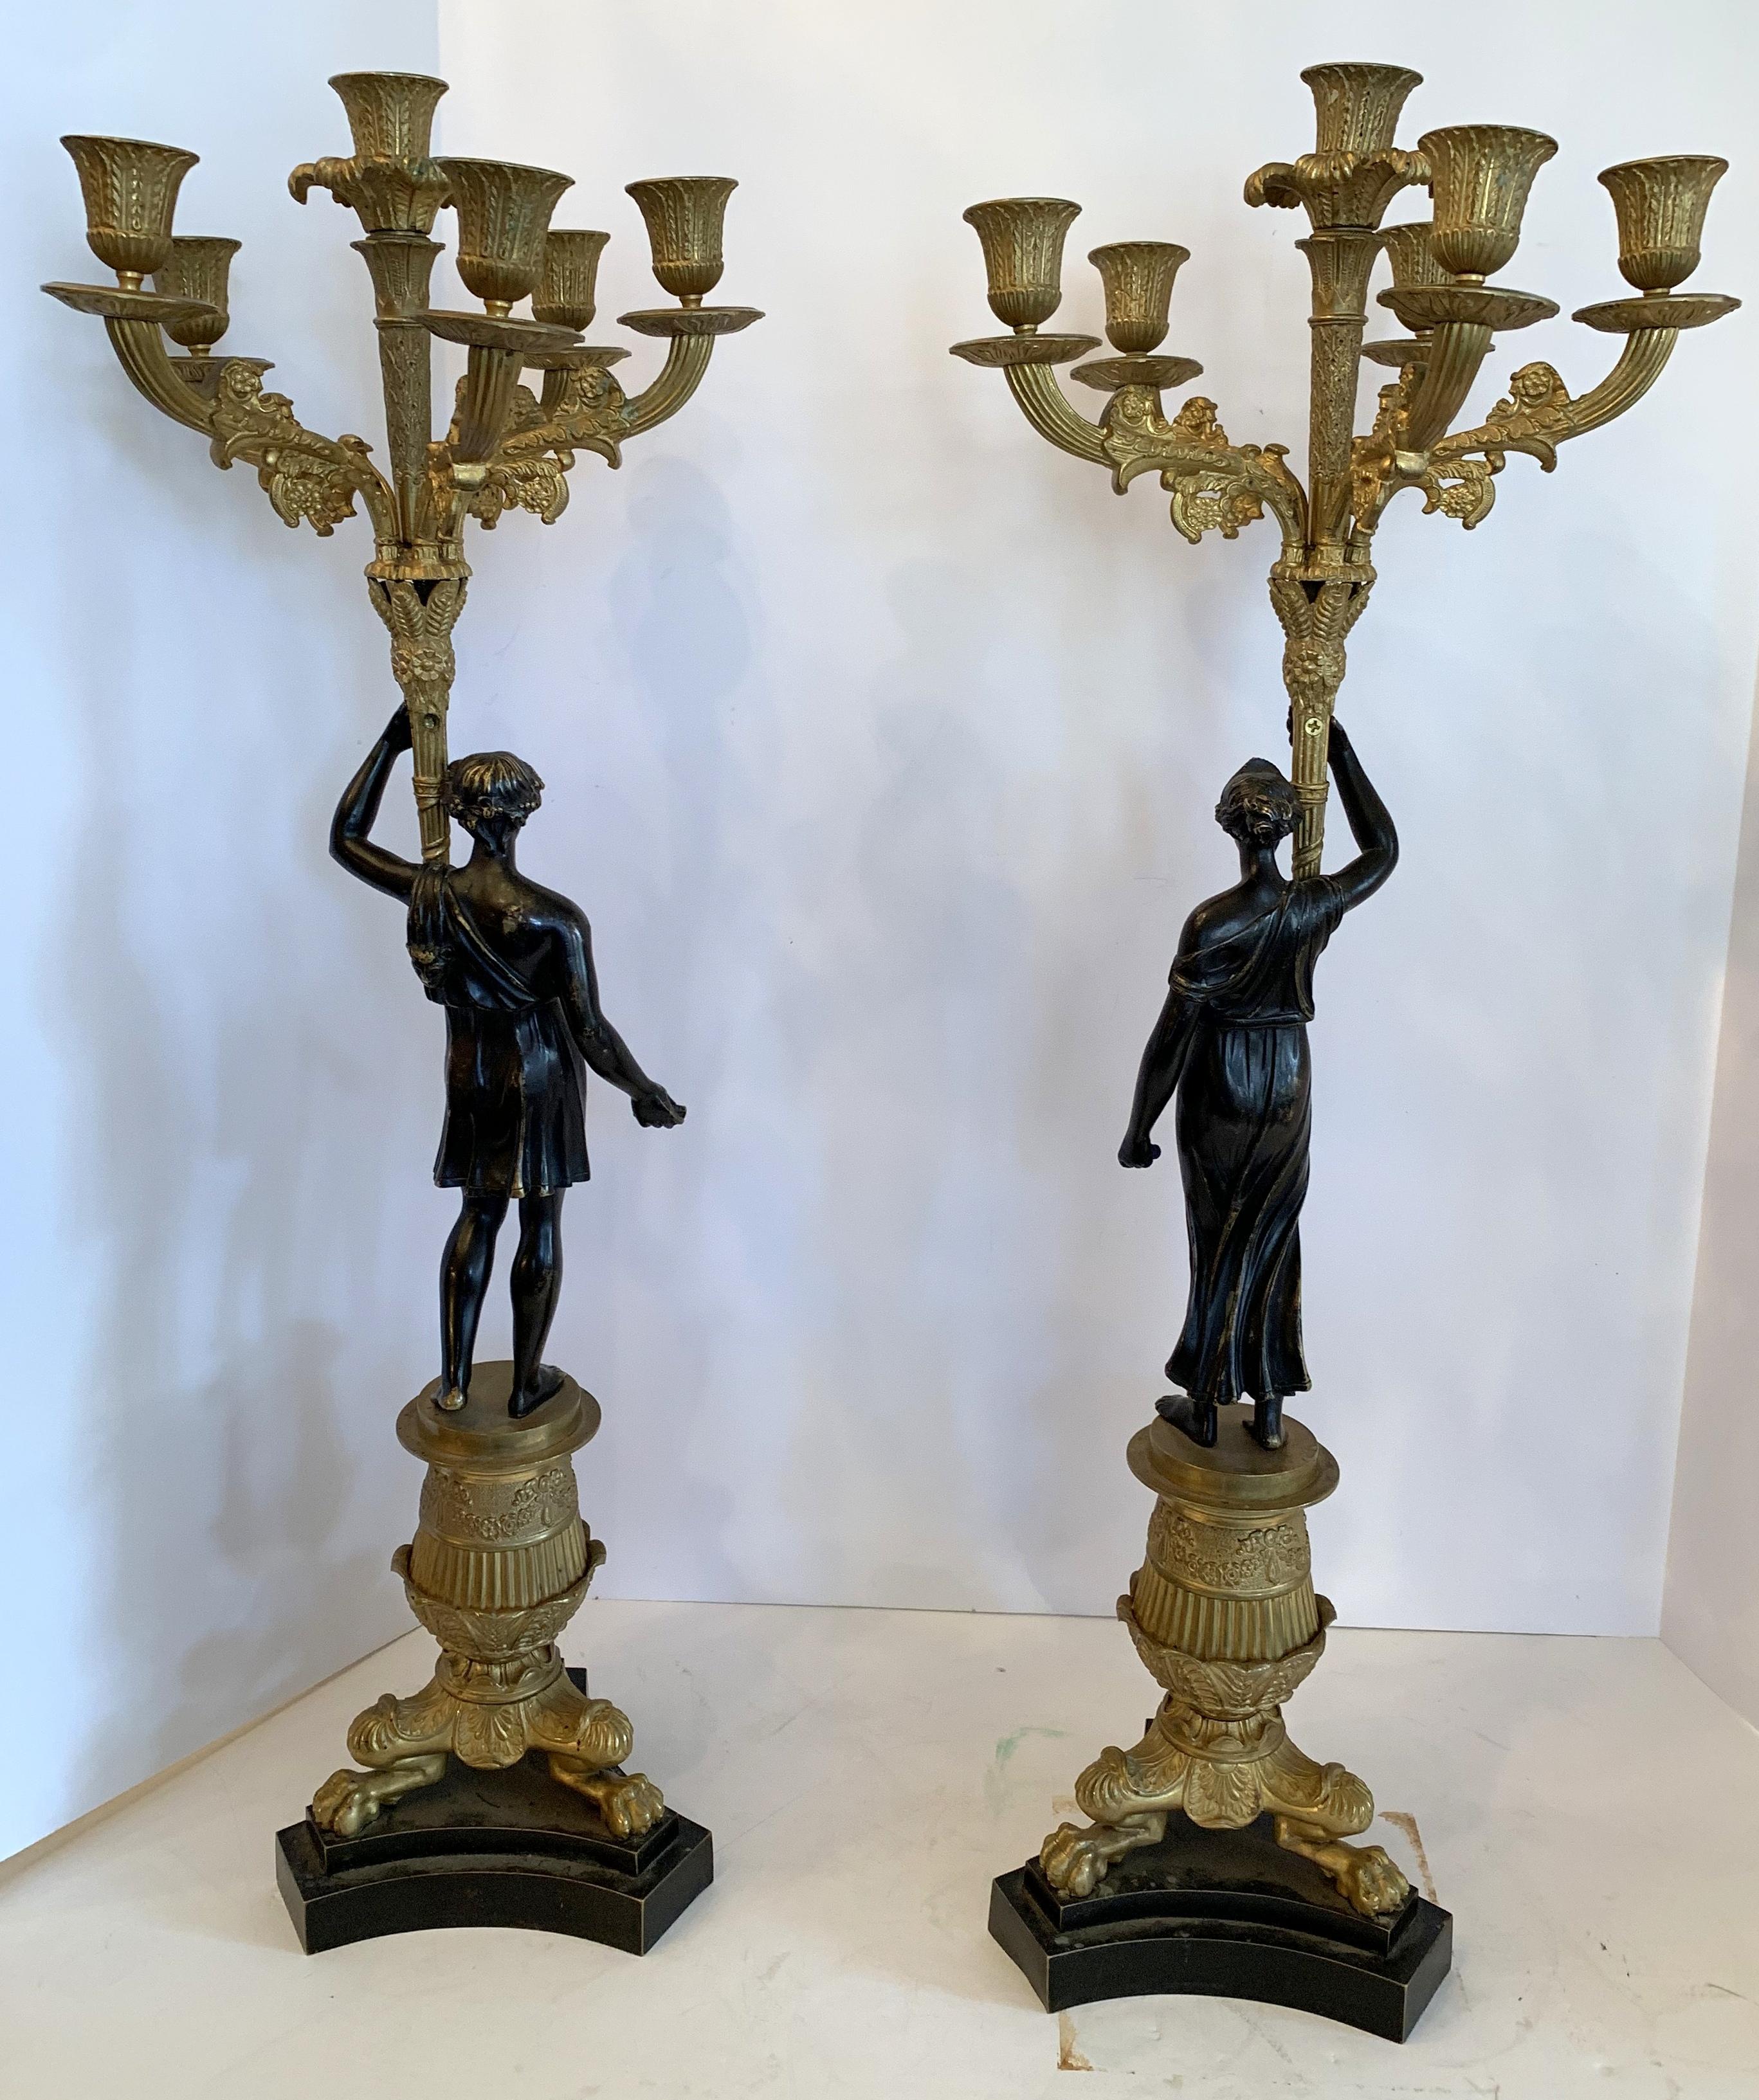 Wonderful Pair of French Empire Gilt Patinated Bronze Figural Regency For Sale 2